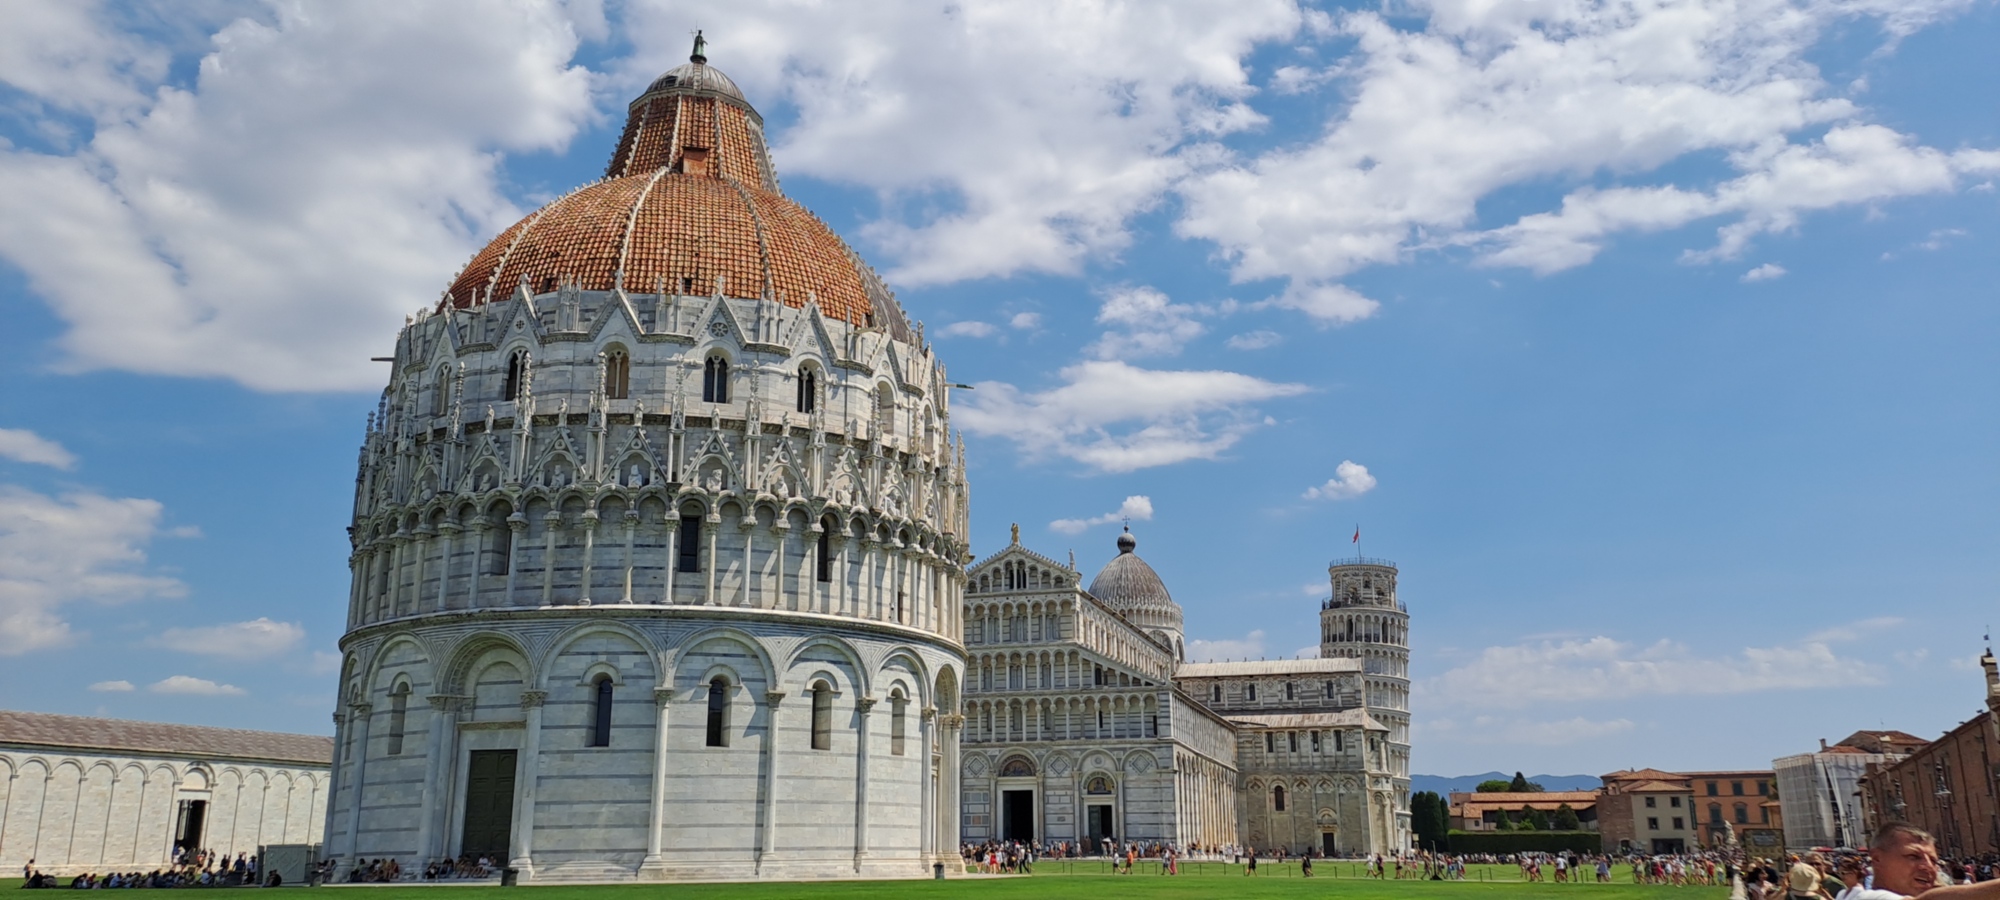 Guided visit to the Field of Miracles and Leaning Tower climbing in Pisa